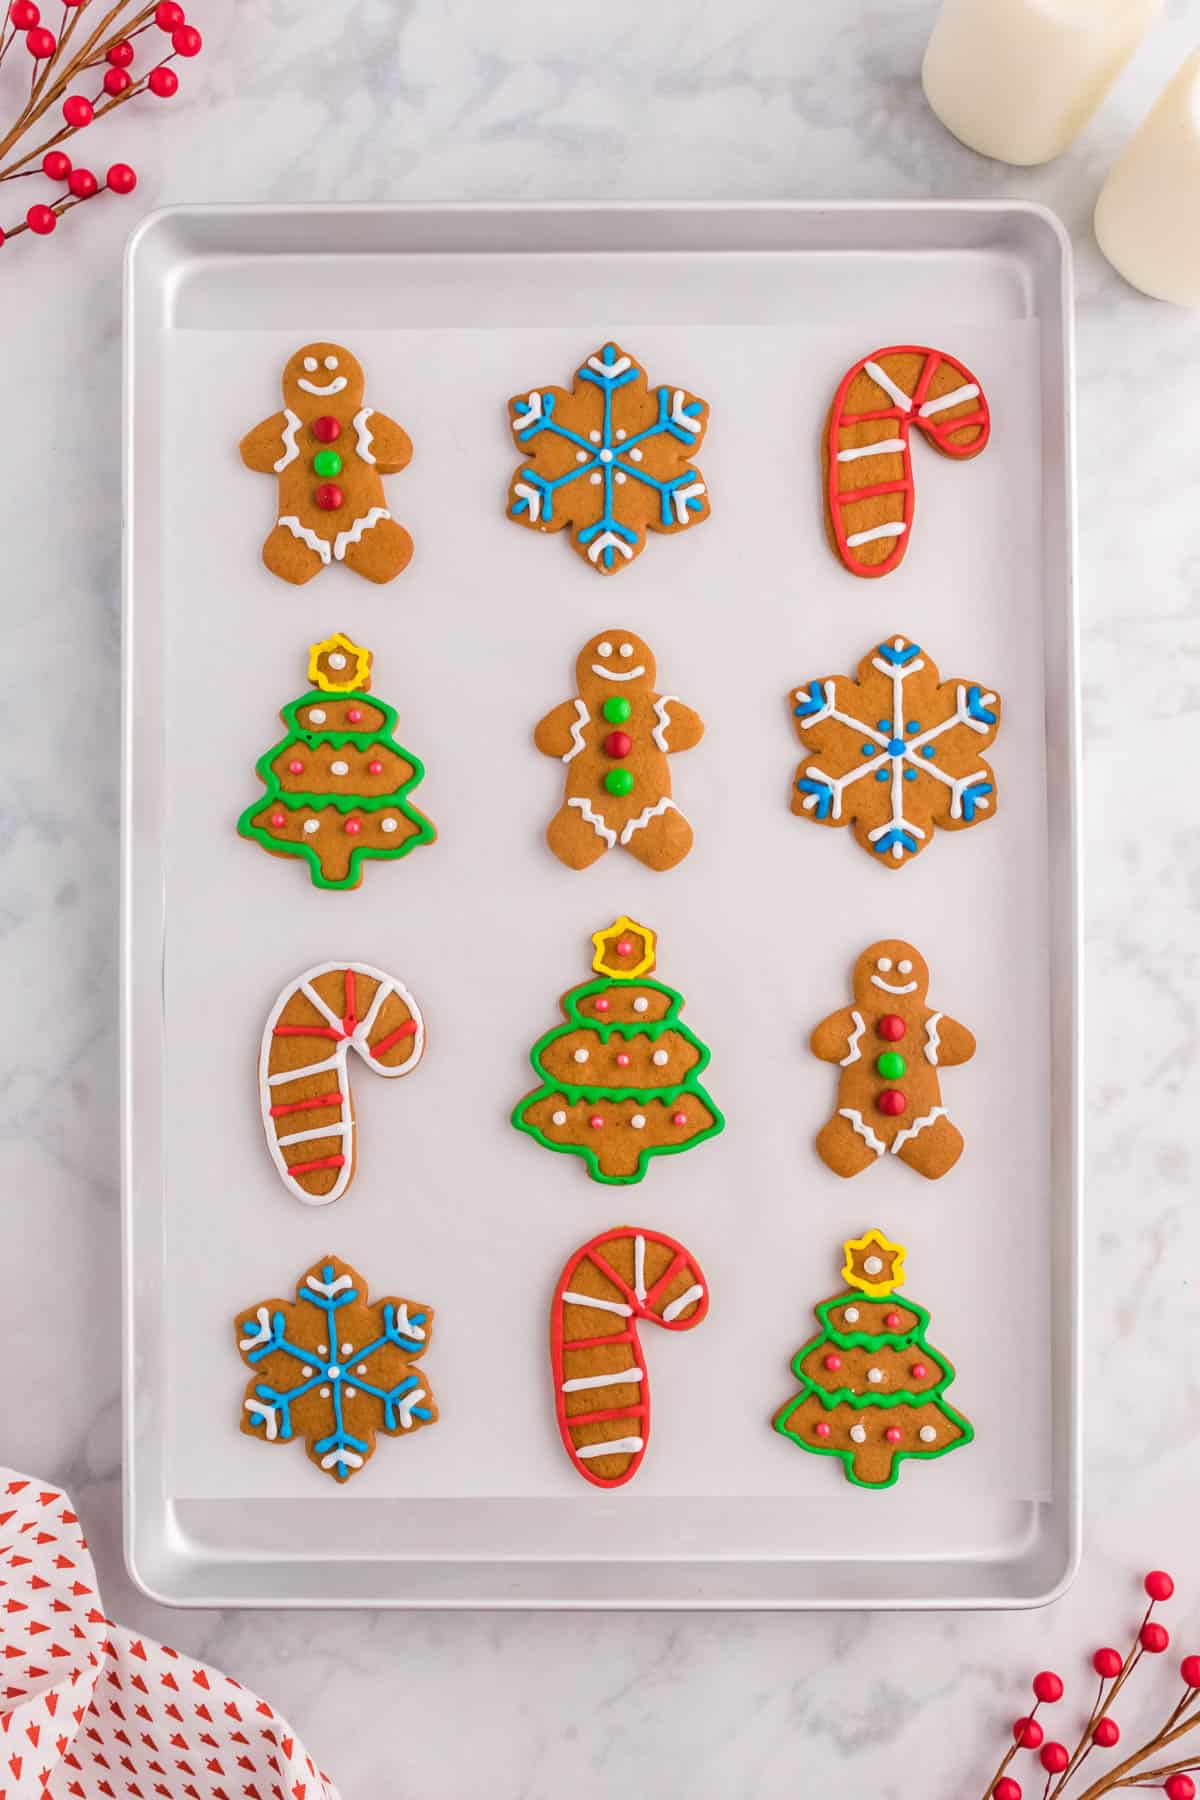 12 gingerbread cut out cookies decorated and arranged in grid pattern on baking sheet